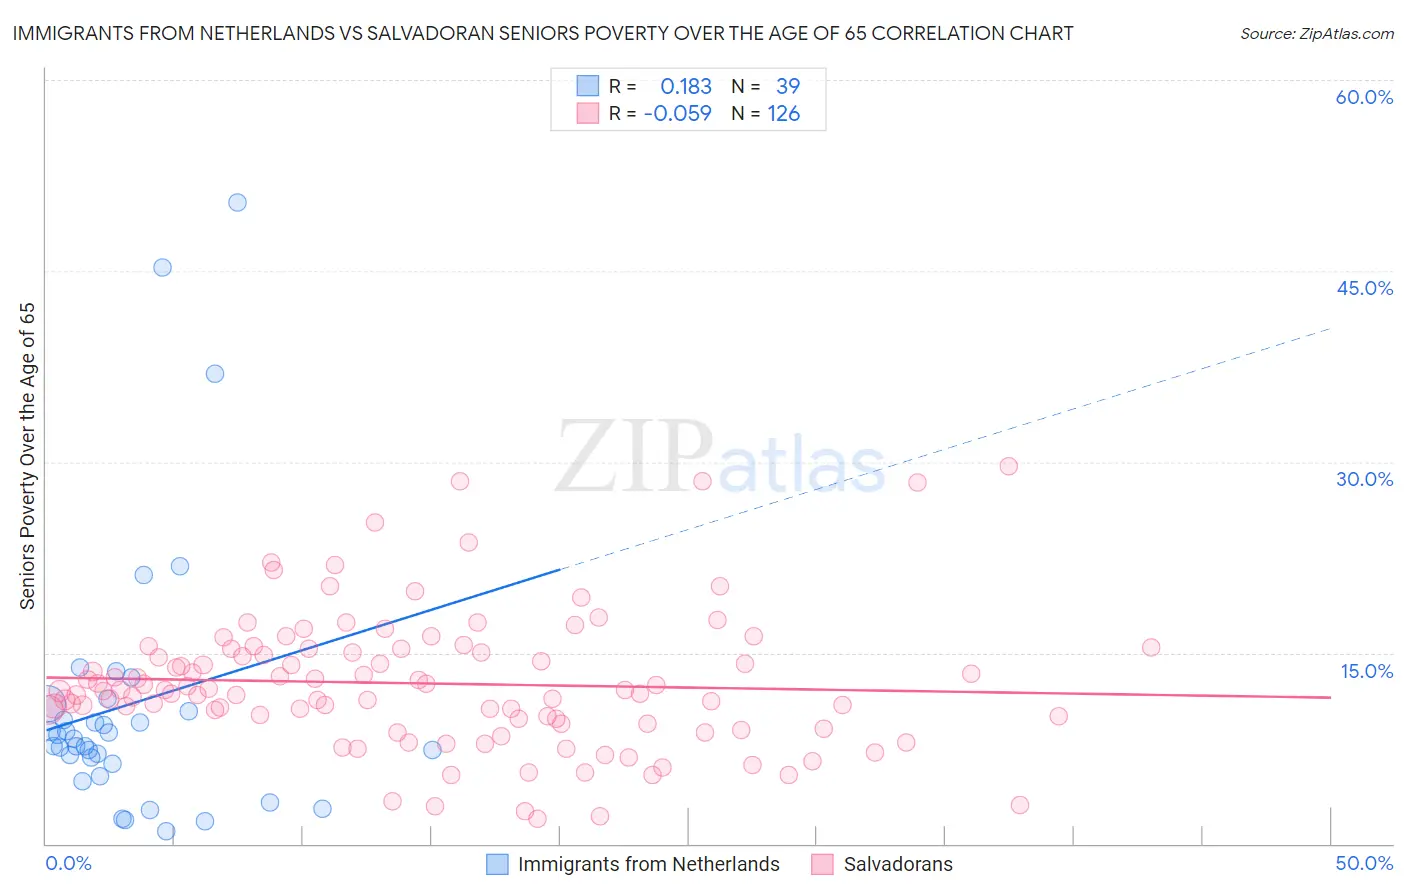 Immigrants from Netherlands vs Salvadoran Seniors Poverty Over the Age of 65